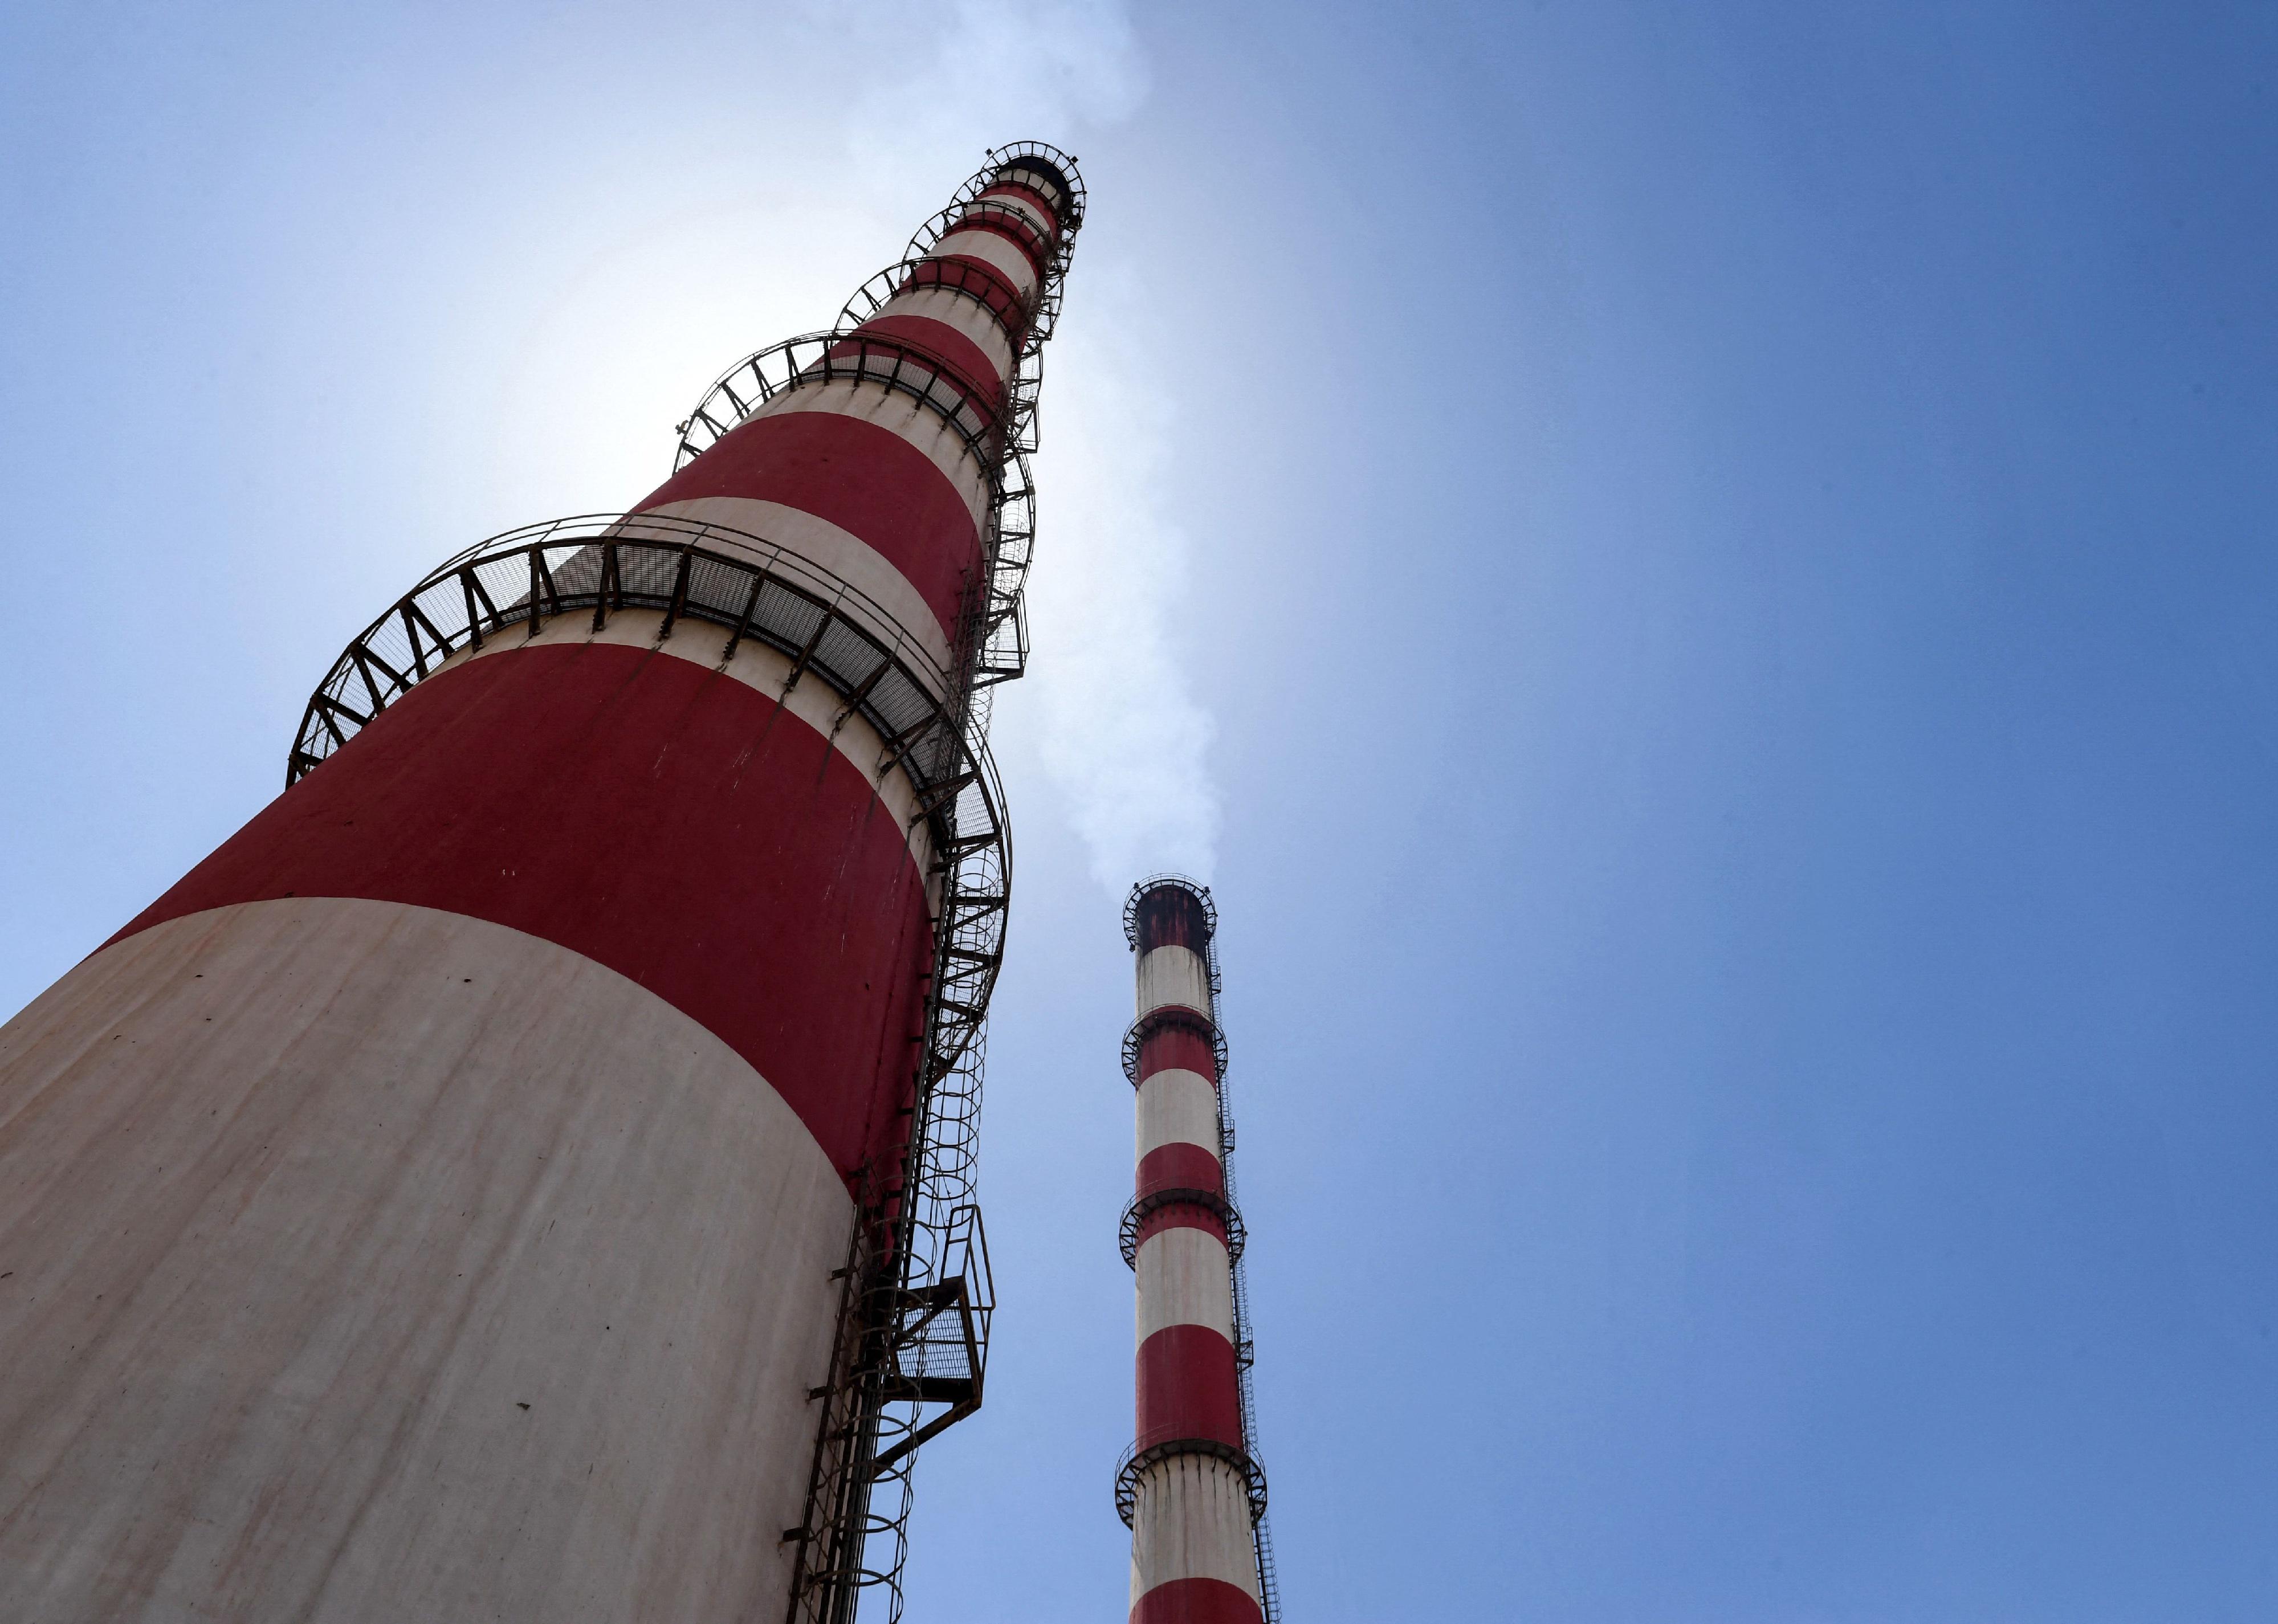 Red-and-white striped chimneys at the thermal natural gas and fuel-oil power plant serving Syria